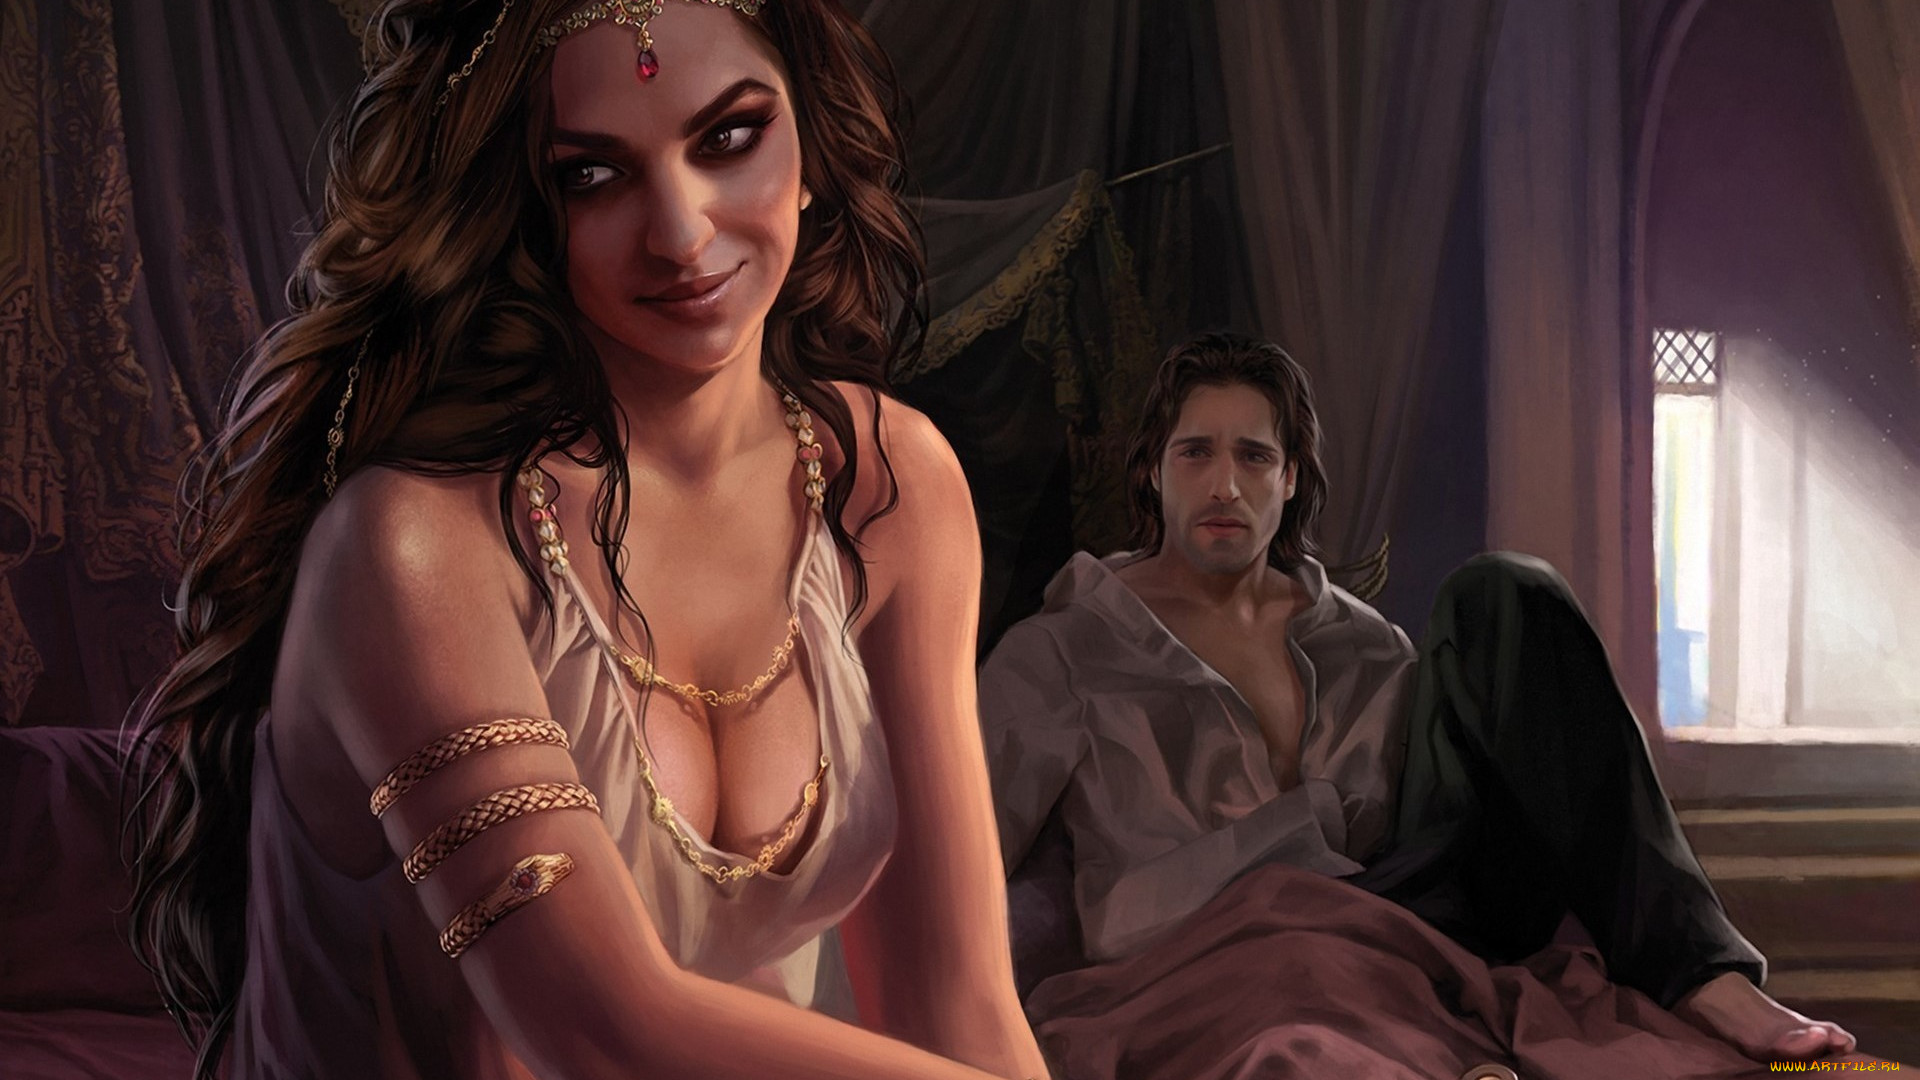 Men Women Fantasy Girl Looking Away Long Hair Brunette A Song Of Ice And Fire Arianne Martell A Feas 1920x1080